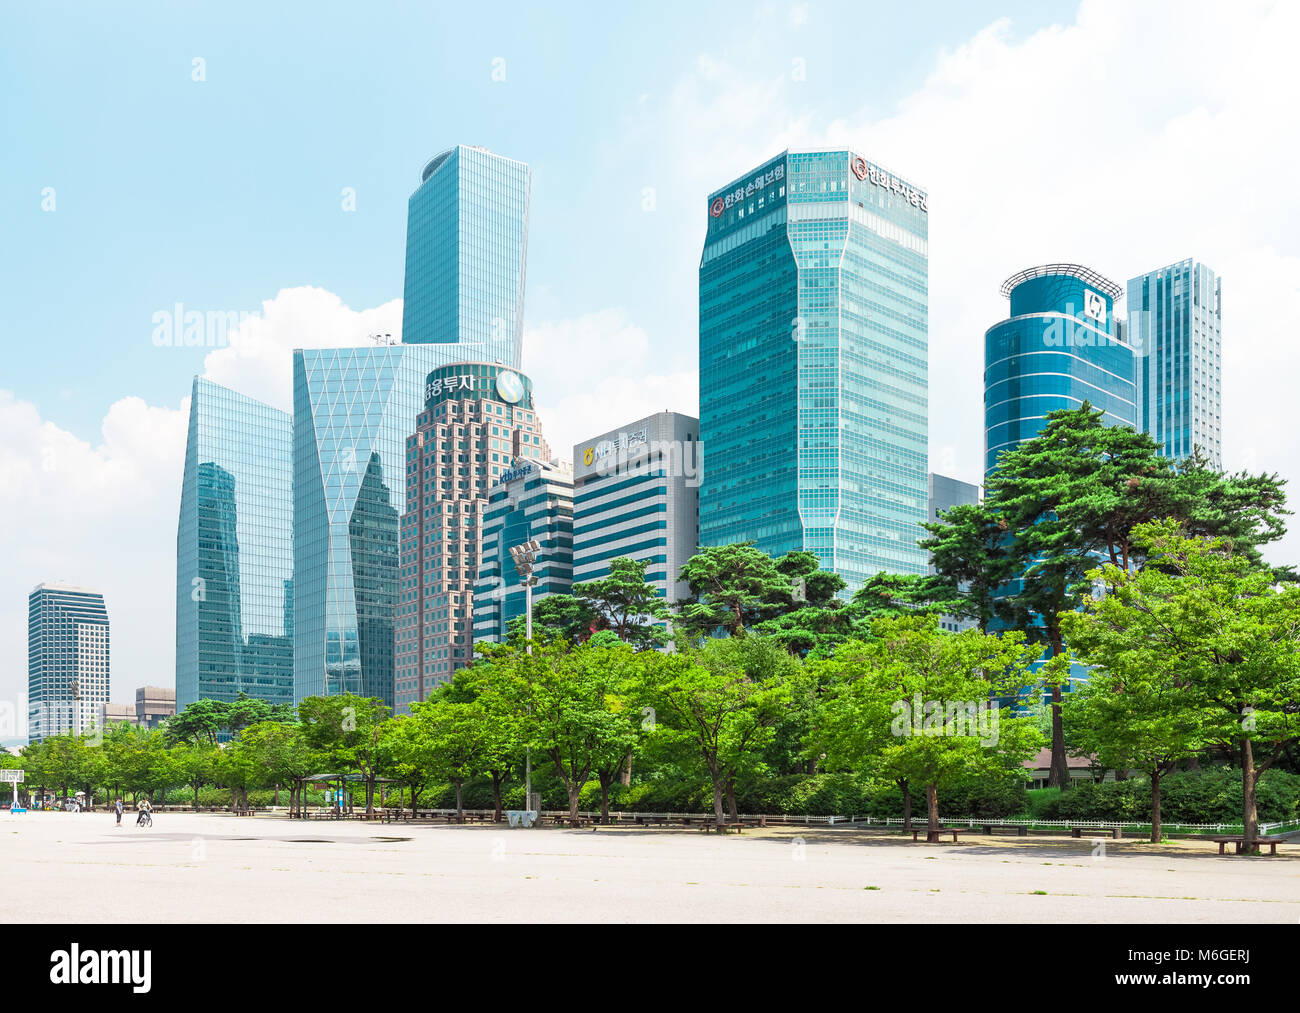 SEOUL, KOREA - AUGUST 14, 2015: Beautiful Yeouido - Seoul's main finance and investment banking district and office area of Korea’s top businesses in  Stock Photo